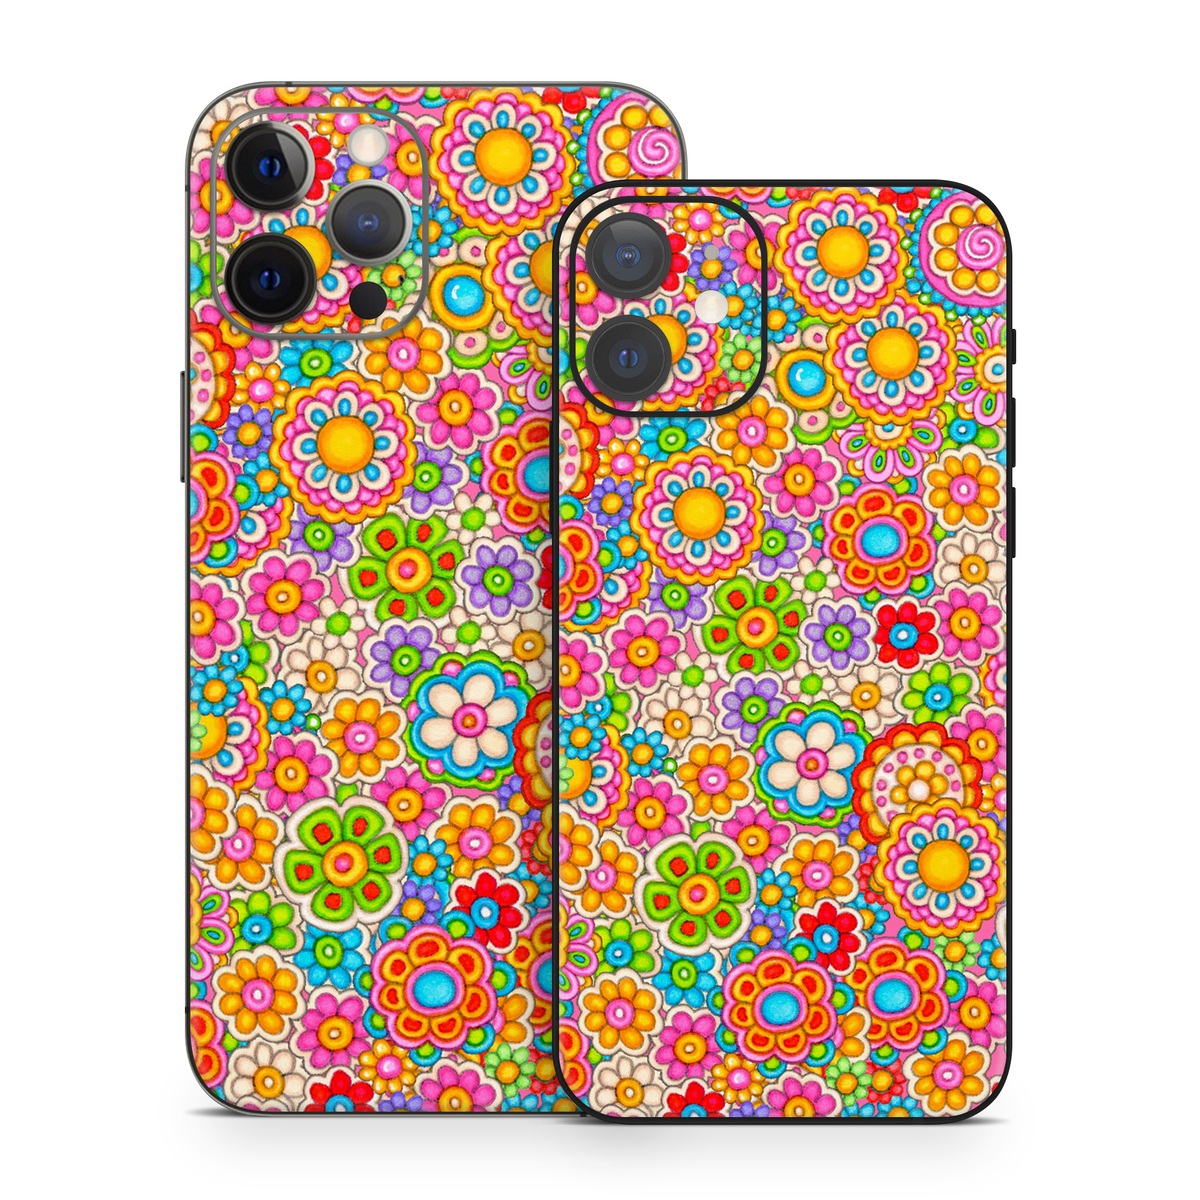 iPhone 12 Series Skin design of Pattern, Design, Textile, Visual arts, with pink, red, orange, yellow, green, blue, purple colors